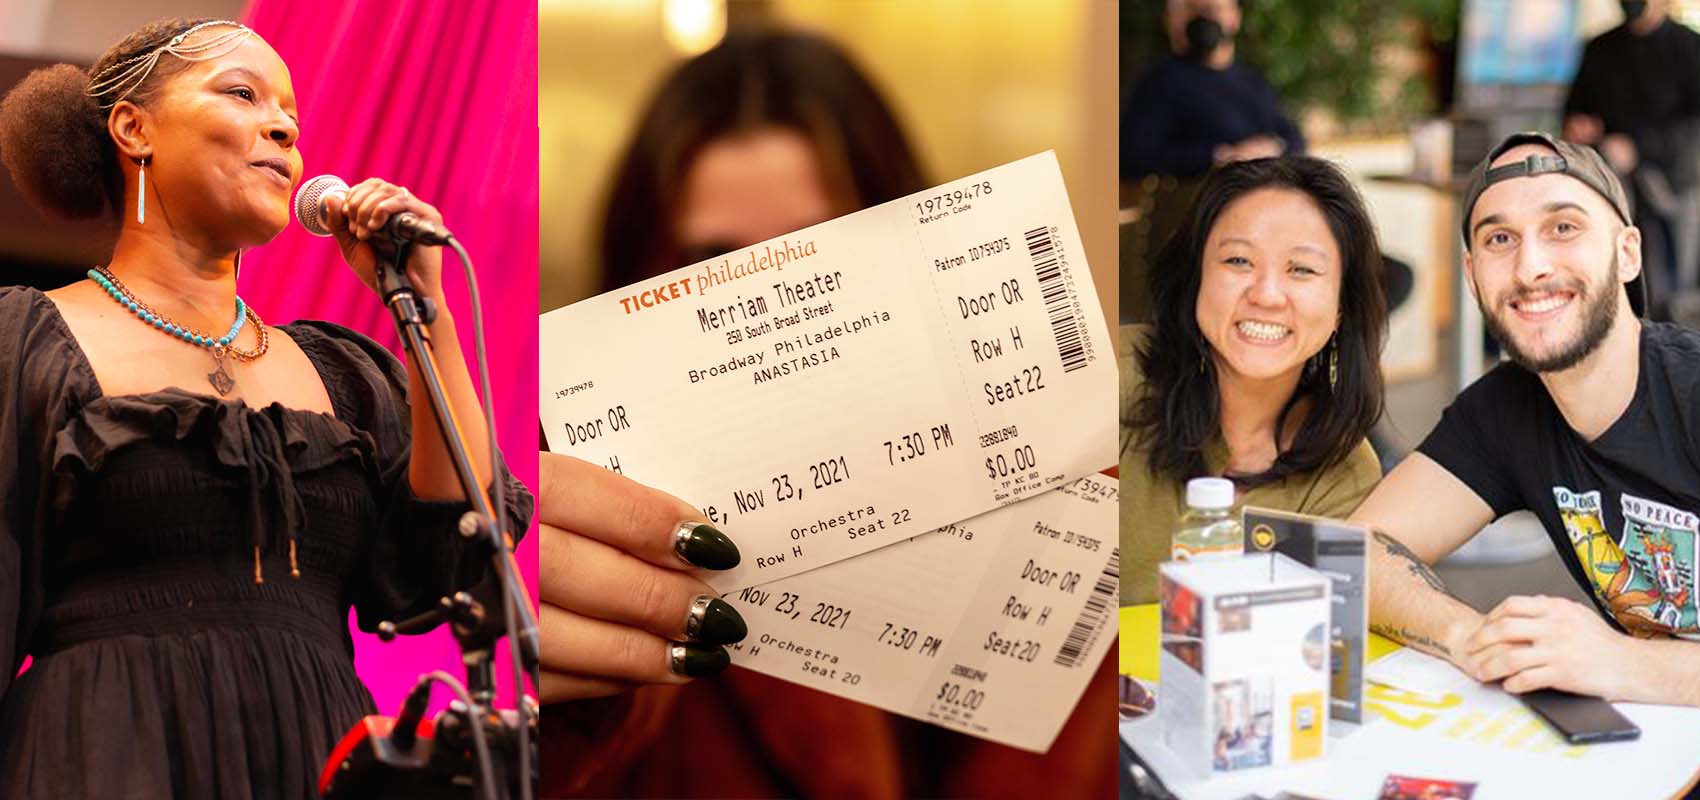 A collage of three photos show a singer on stage, a person holding tickets to a performance, and a couple at a happy hour event on the Kimmel Cultural Campus